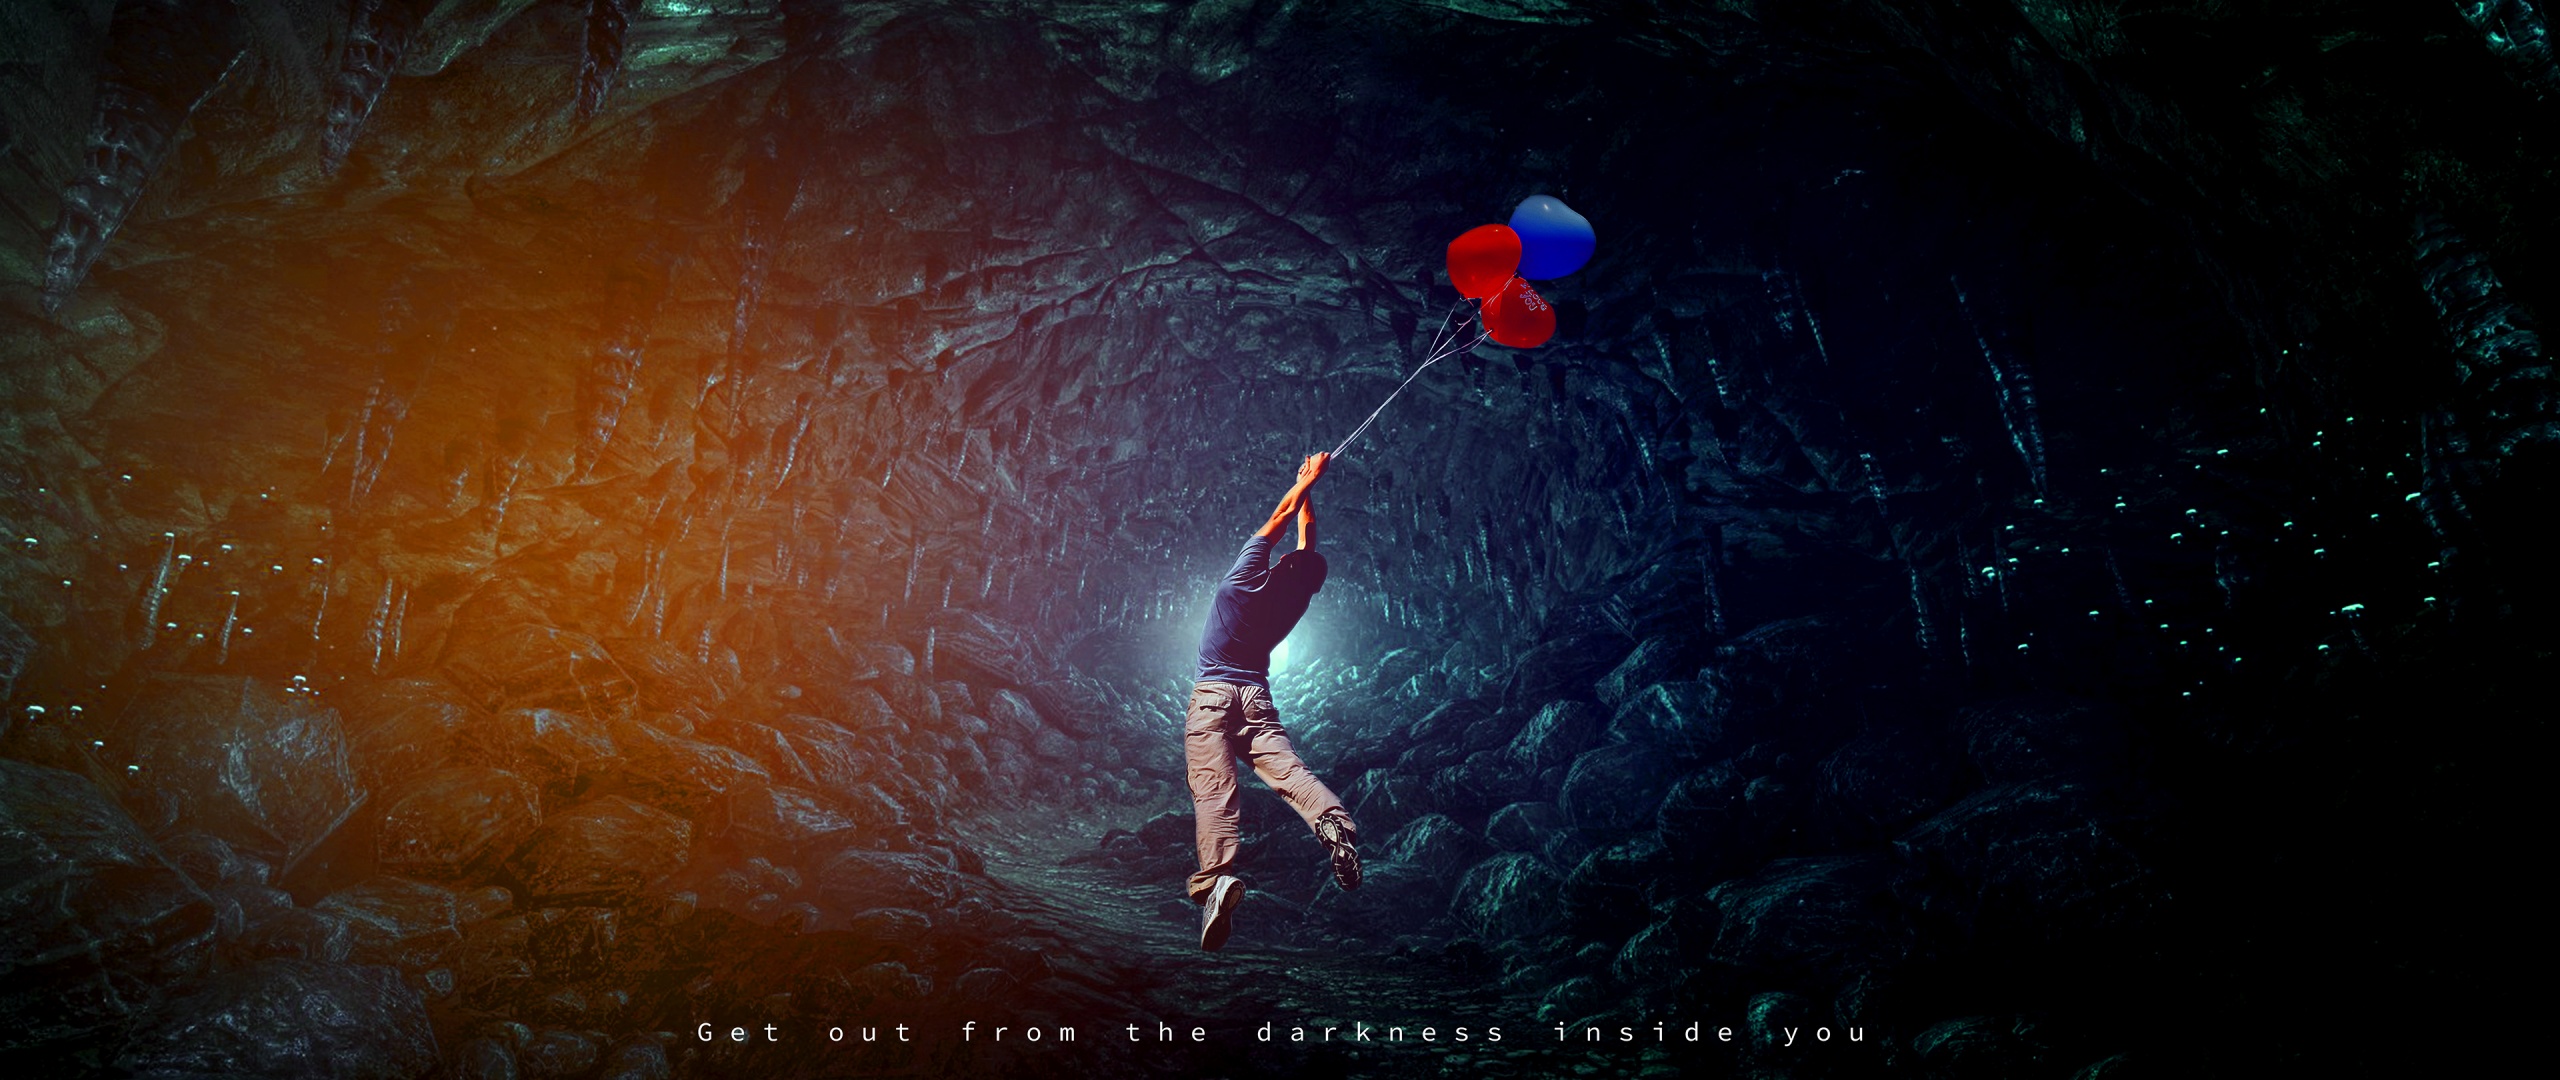 Get out from the Darkness Inside You Wallpaper 4K, Popular quotes, Quotes,  #1956